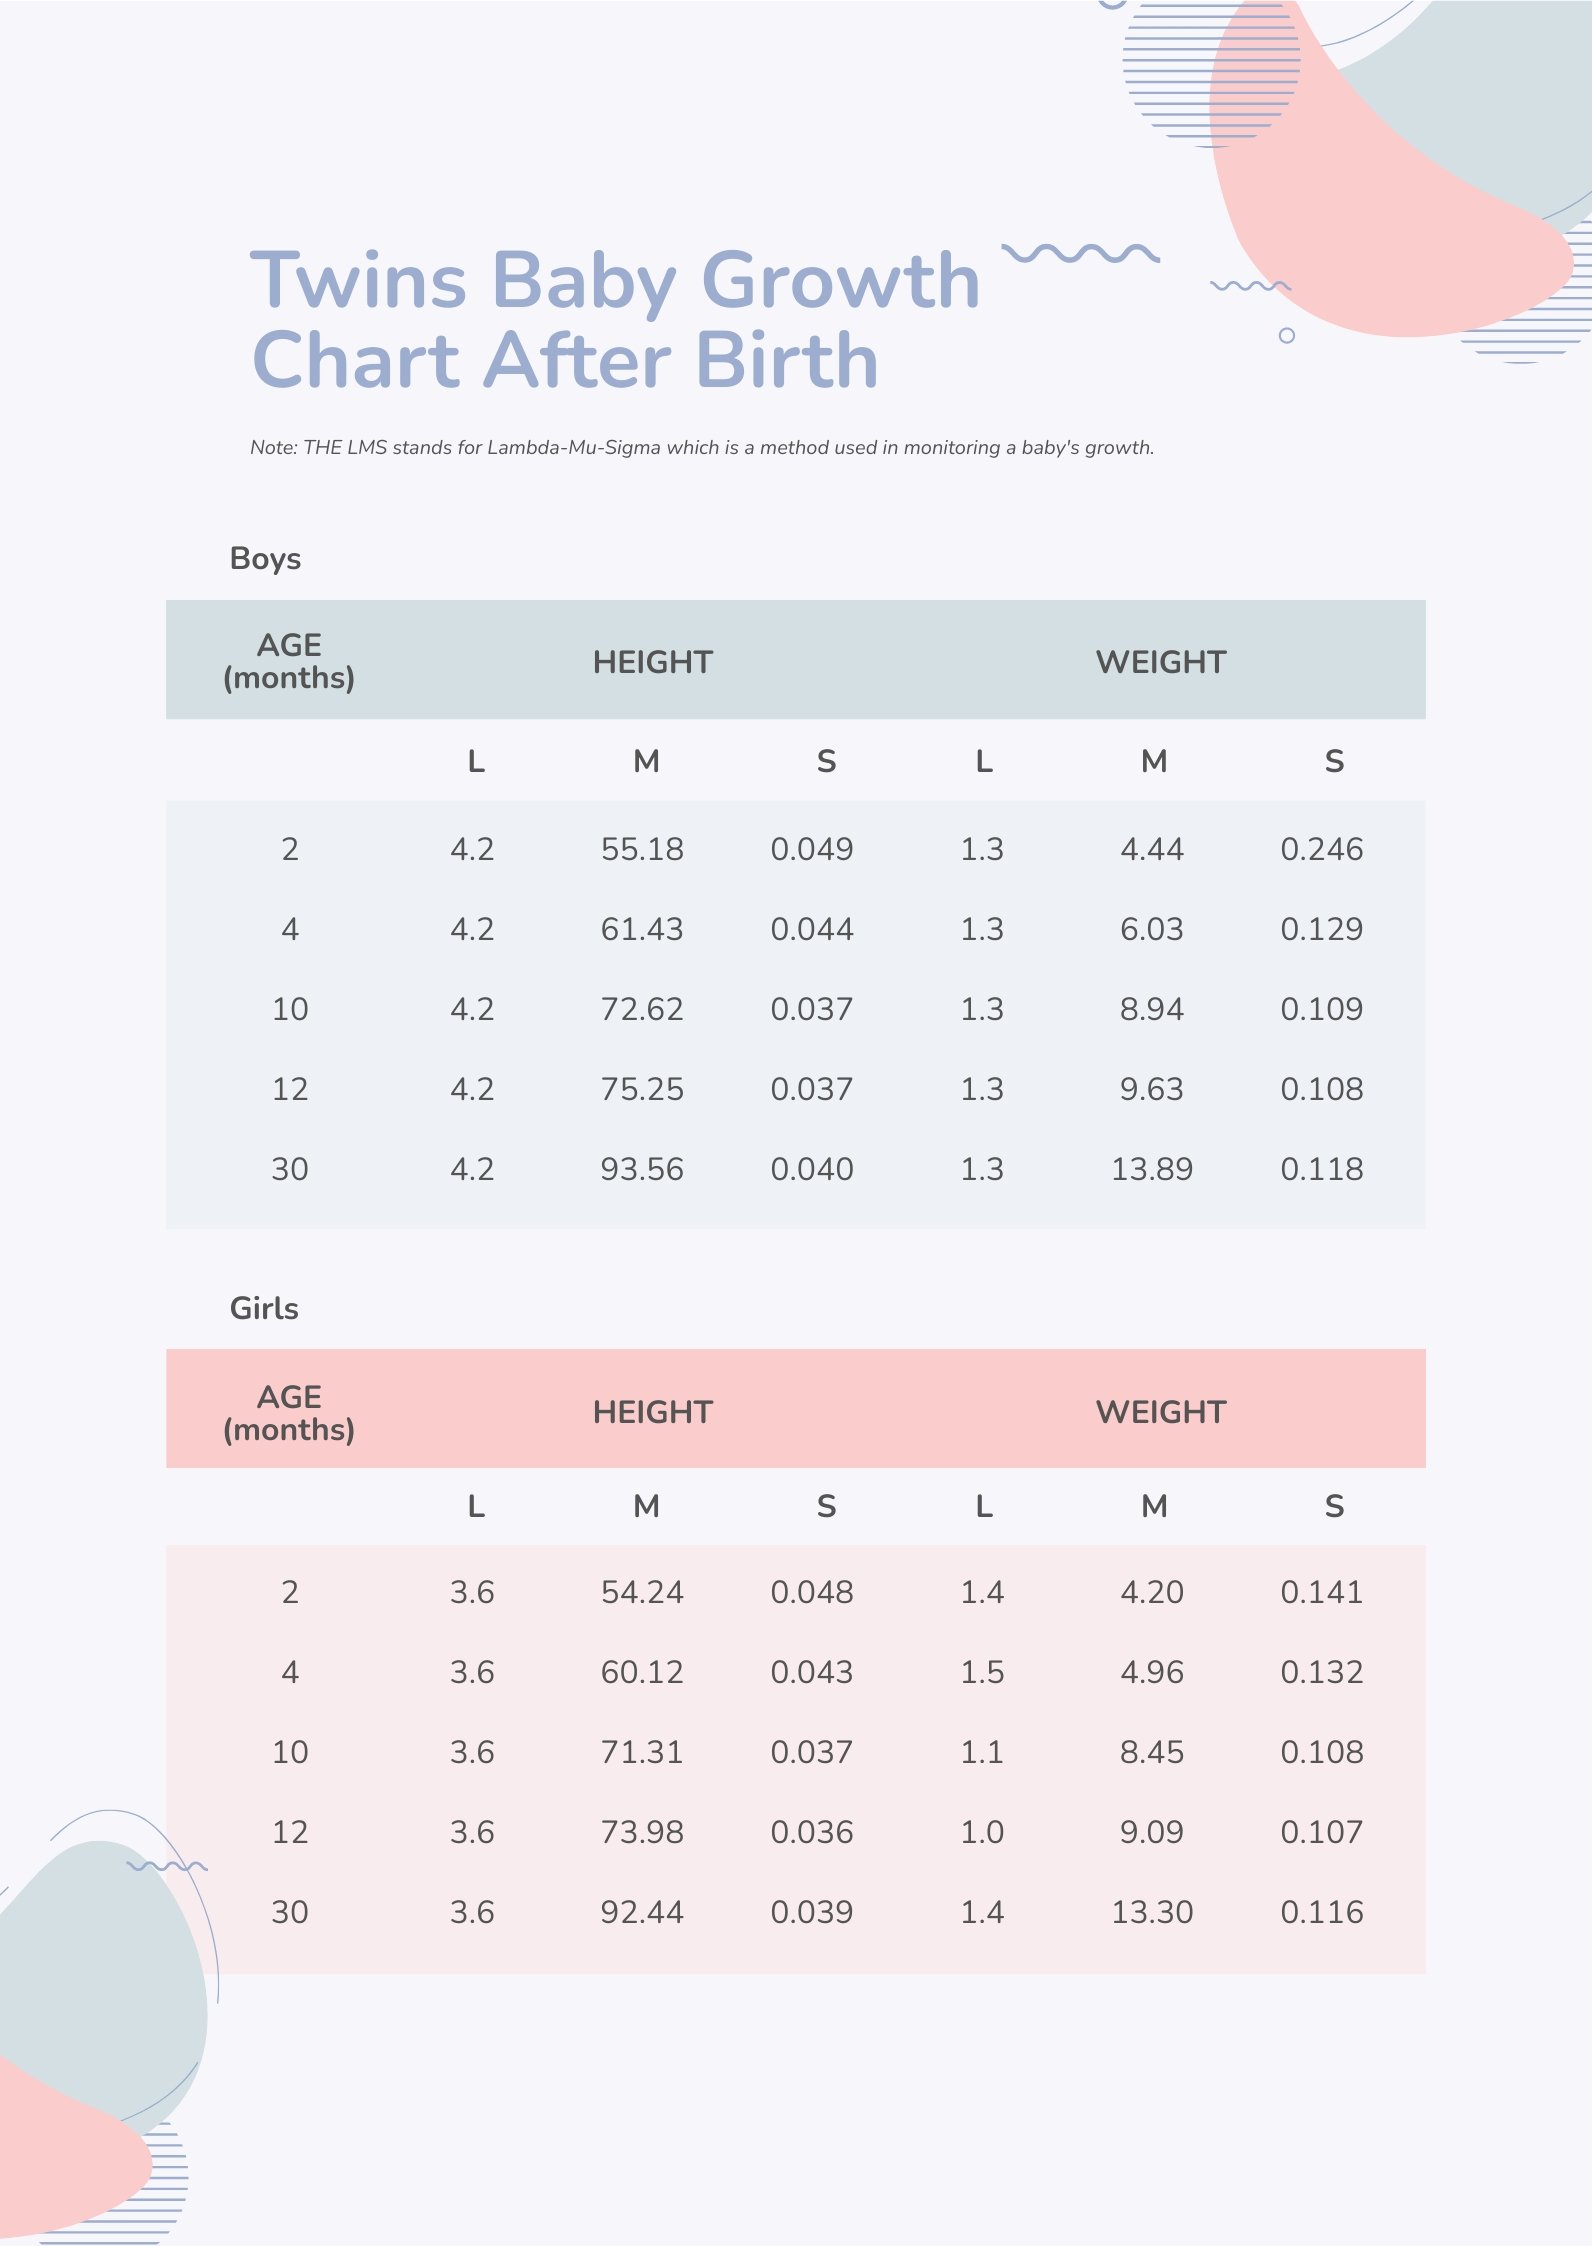 Twin Baby Growth Chart After Birth